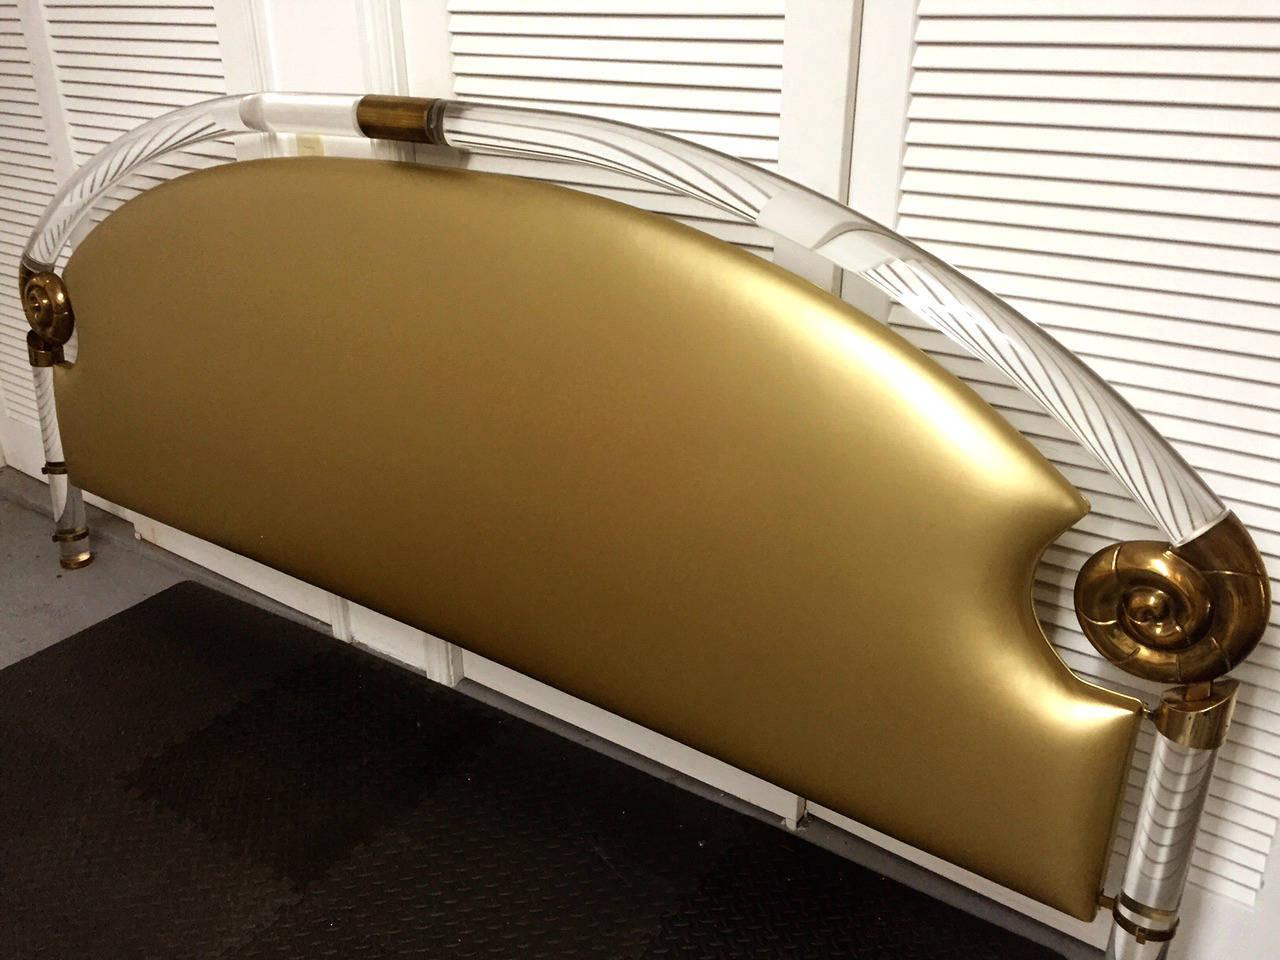 A massive headboard custom-made for the jet setters by Marcello Mioni, circa 1970s. This is one of the most lavish designs in the Hollywood Regency style and it epitomizes the glamorous disco era. The heavy frame was constructed with solid Lucite